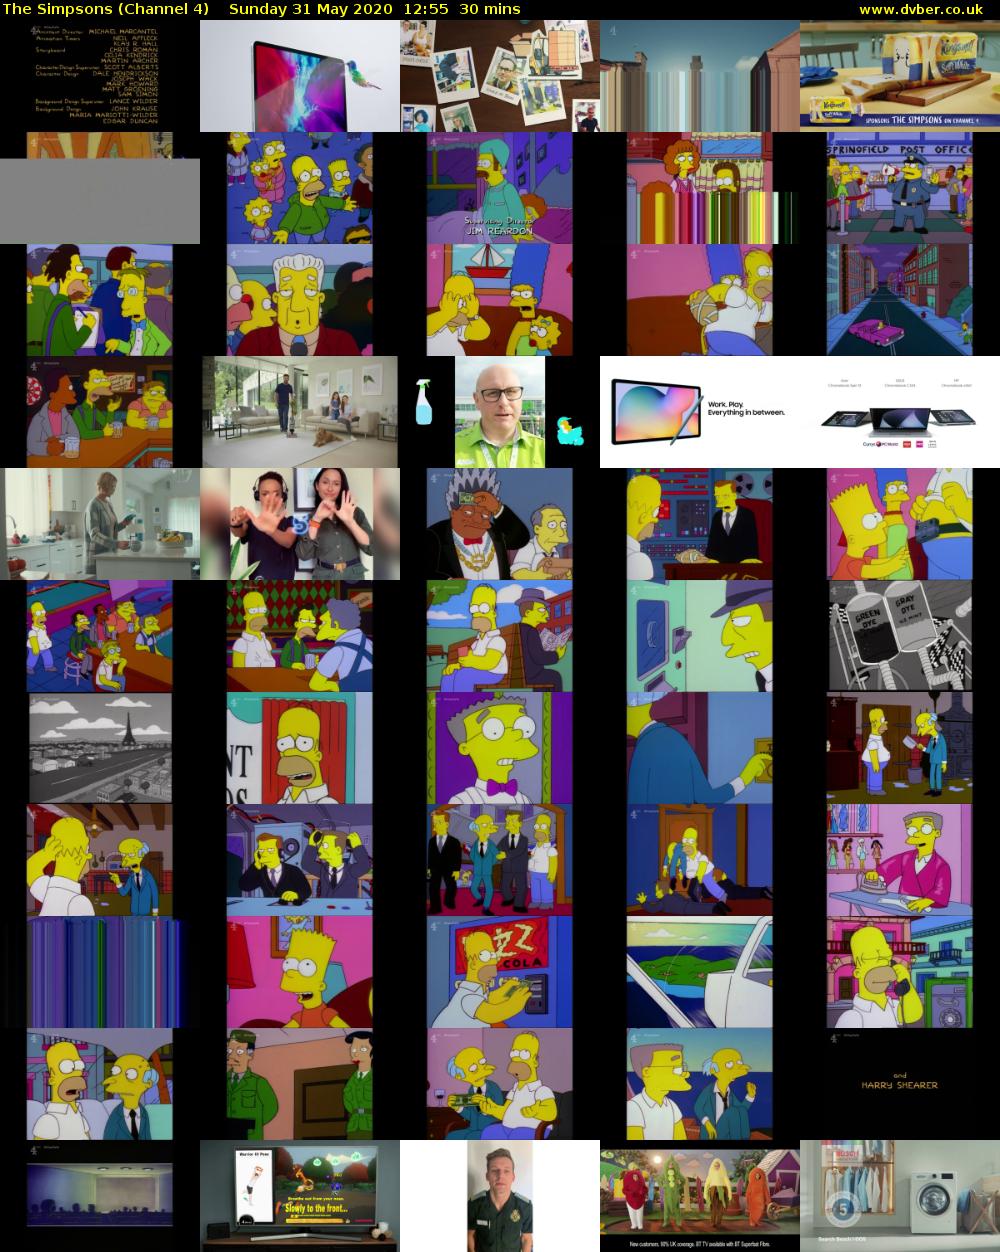 The Simpsons (Channel 4) Sunday 31 May 2020 12:55 - 13:25